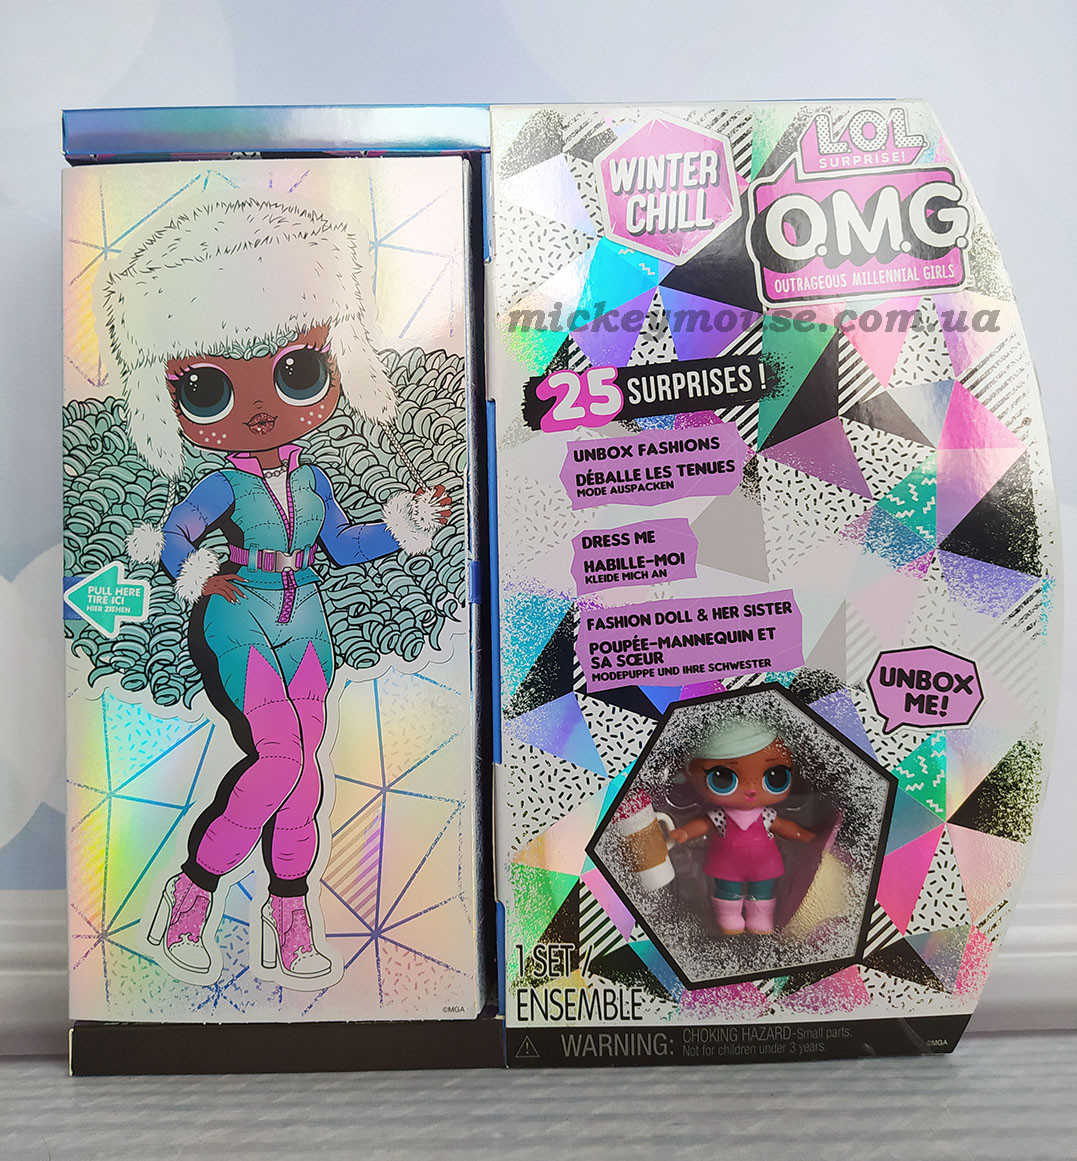 LOL Surprise! OMG Winter Chill ICY Gurl Fashion Doll & Brrr BB Doll with 25  Surprises (570240)